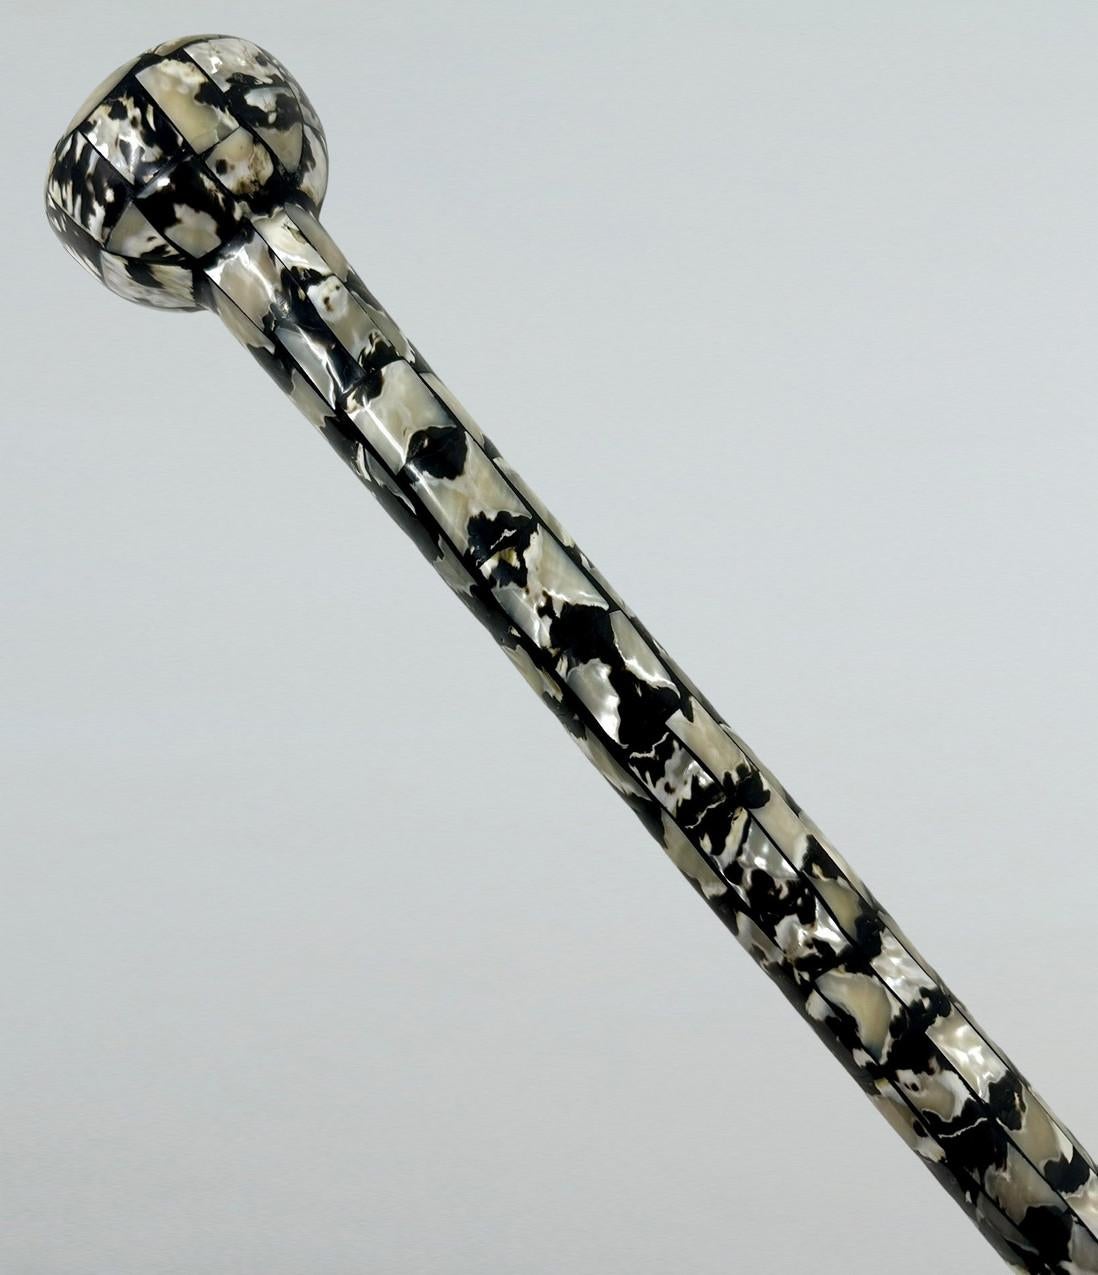 British Vintage Lady's Gentleman's Mother of Pearl Traveling Walking Swagger Stick Cane  For Sale